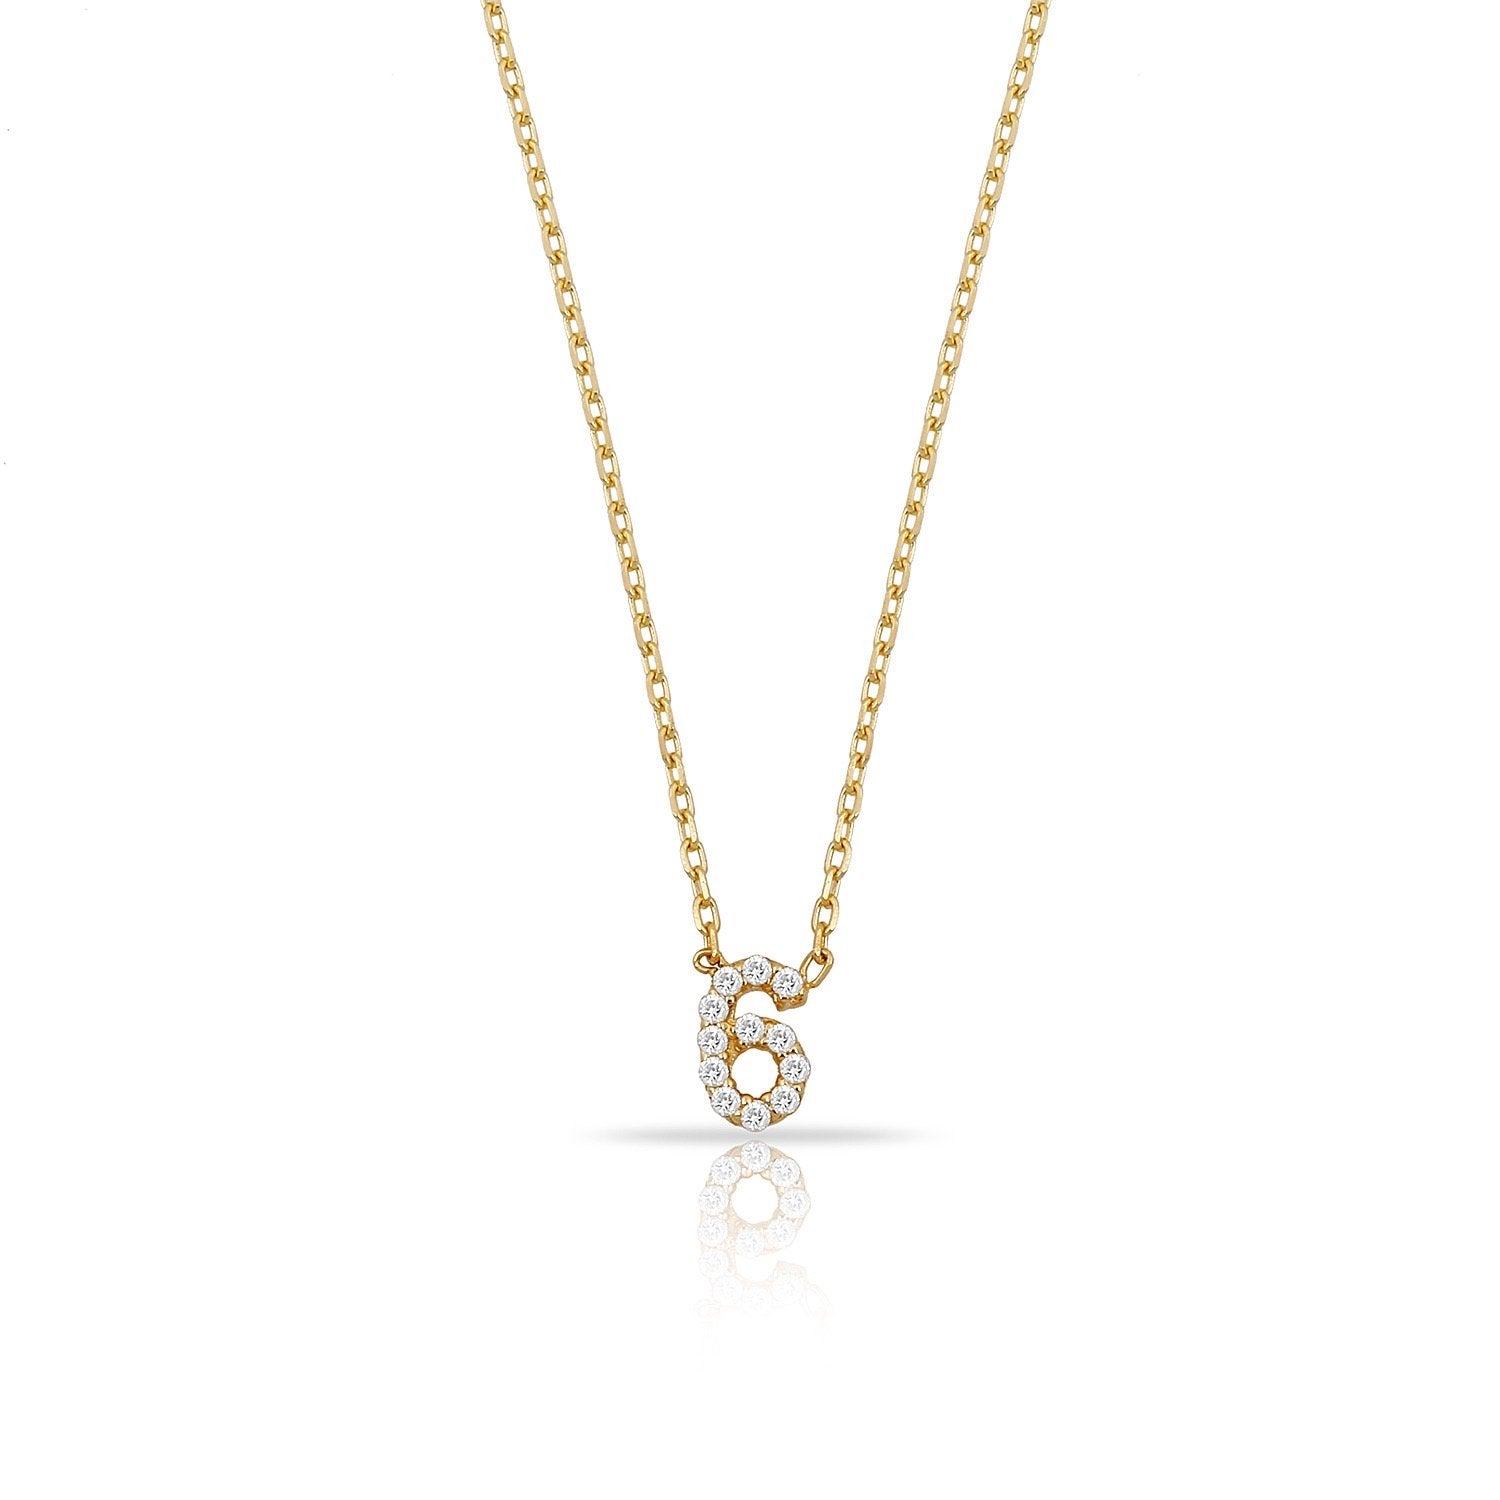 TSK Perry St. Diamond Digit Necklace JEWELRY The Sis Kiss 14k Gold